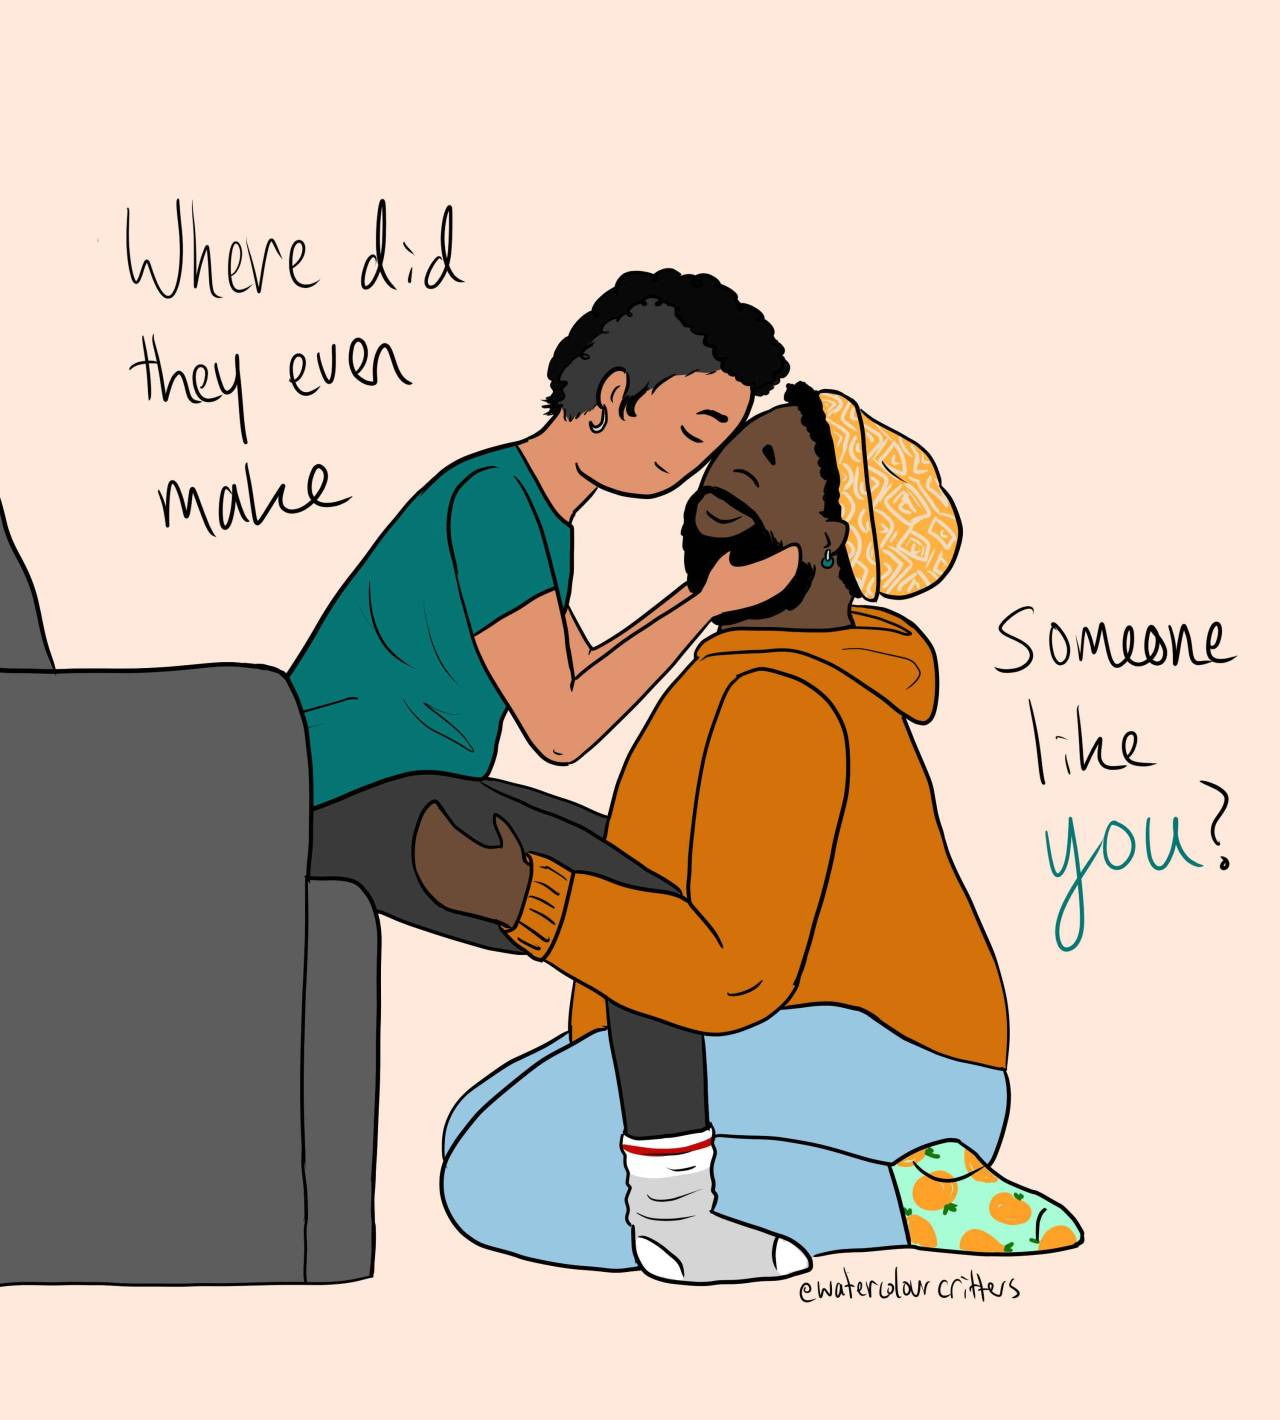 Digital art in a cartoon style of Jim and Oluwande from OFMD. Jim sits on a sofa and leans forward to press their forehead against Oluwande's and cup his face with their hands, while Oluwande kneels between their legs with both hands on their thighs. They are both smiling and look peaceful. Text reads 